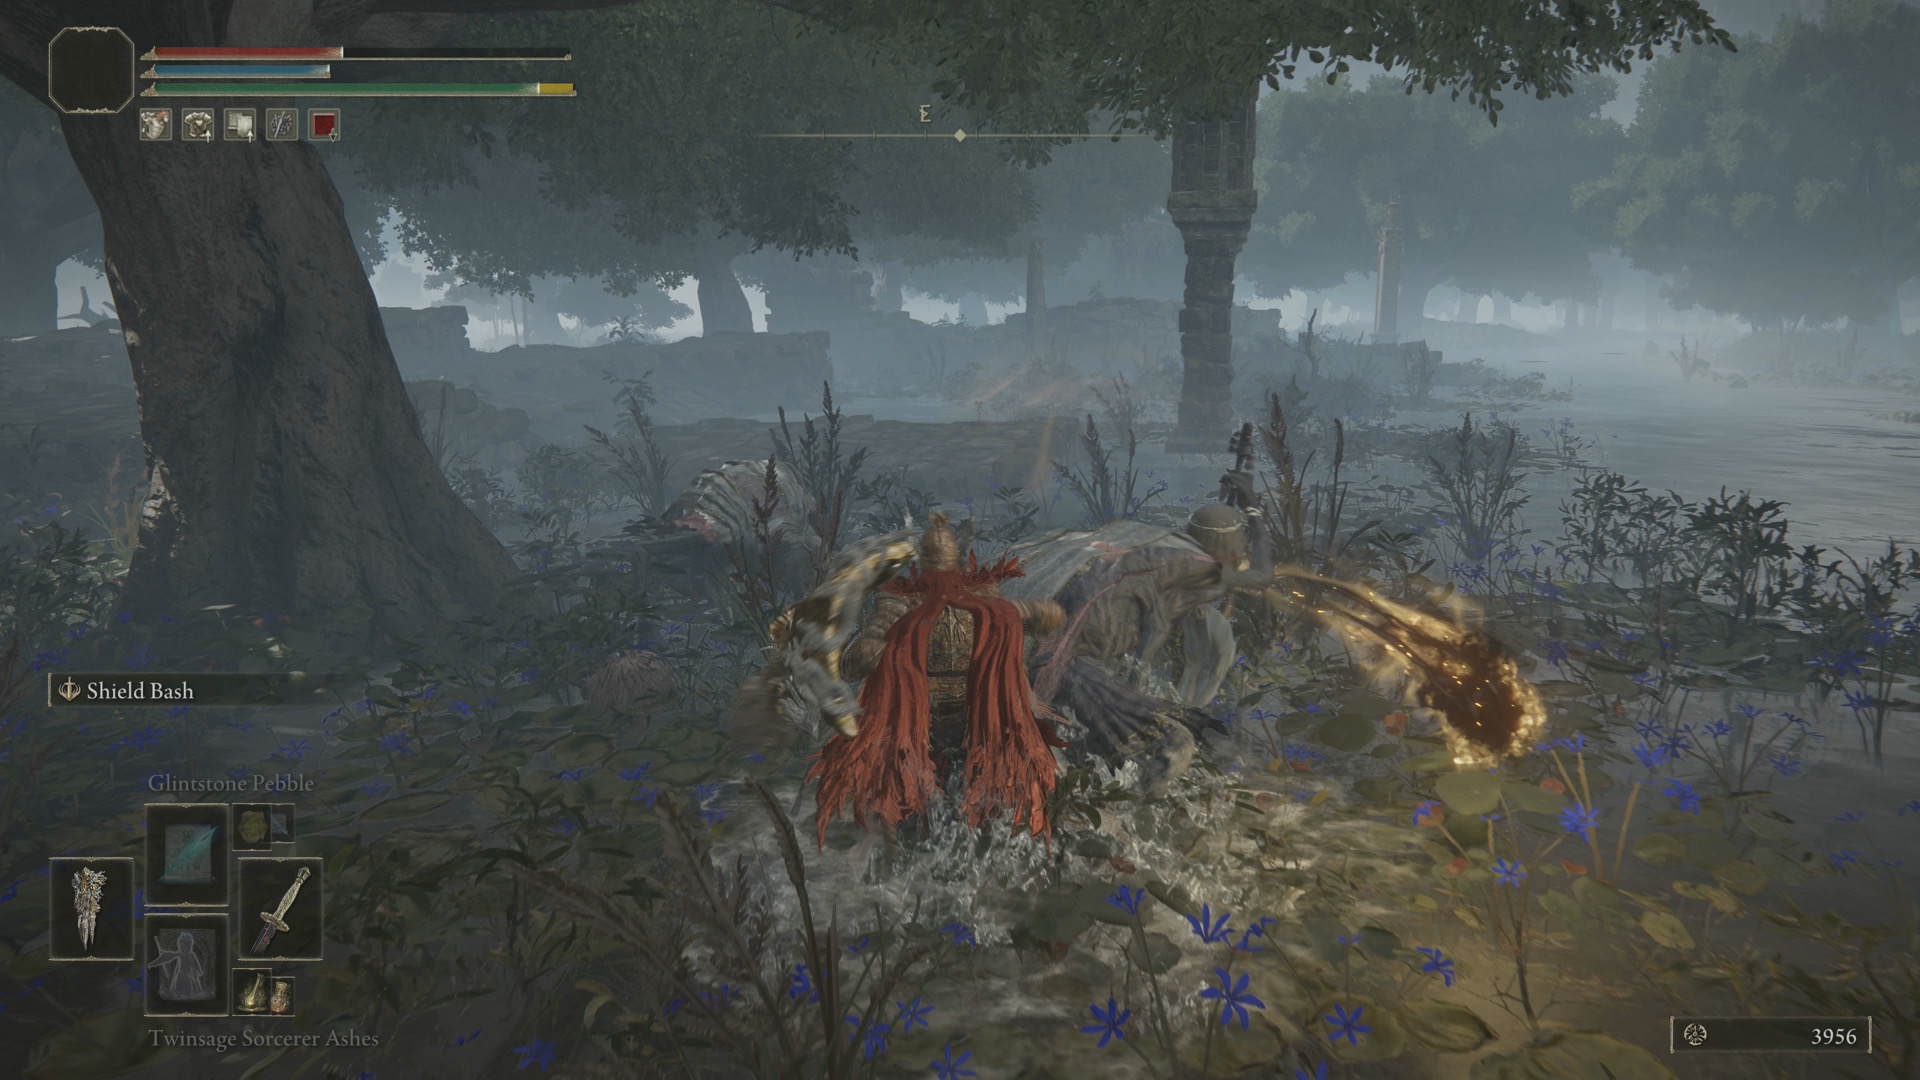 Elden Ring player standing in a swamp while being attacked by a magical projectile